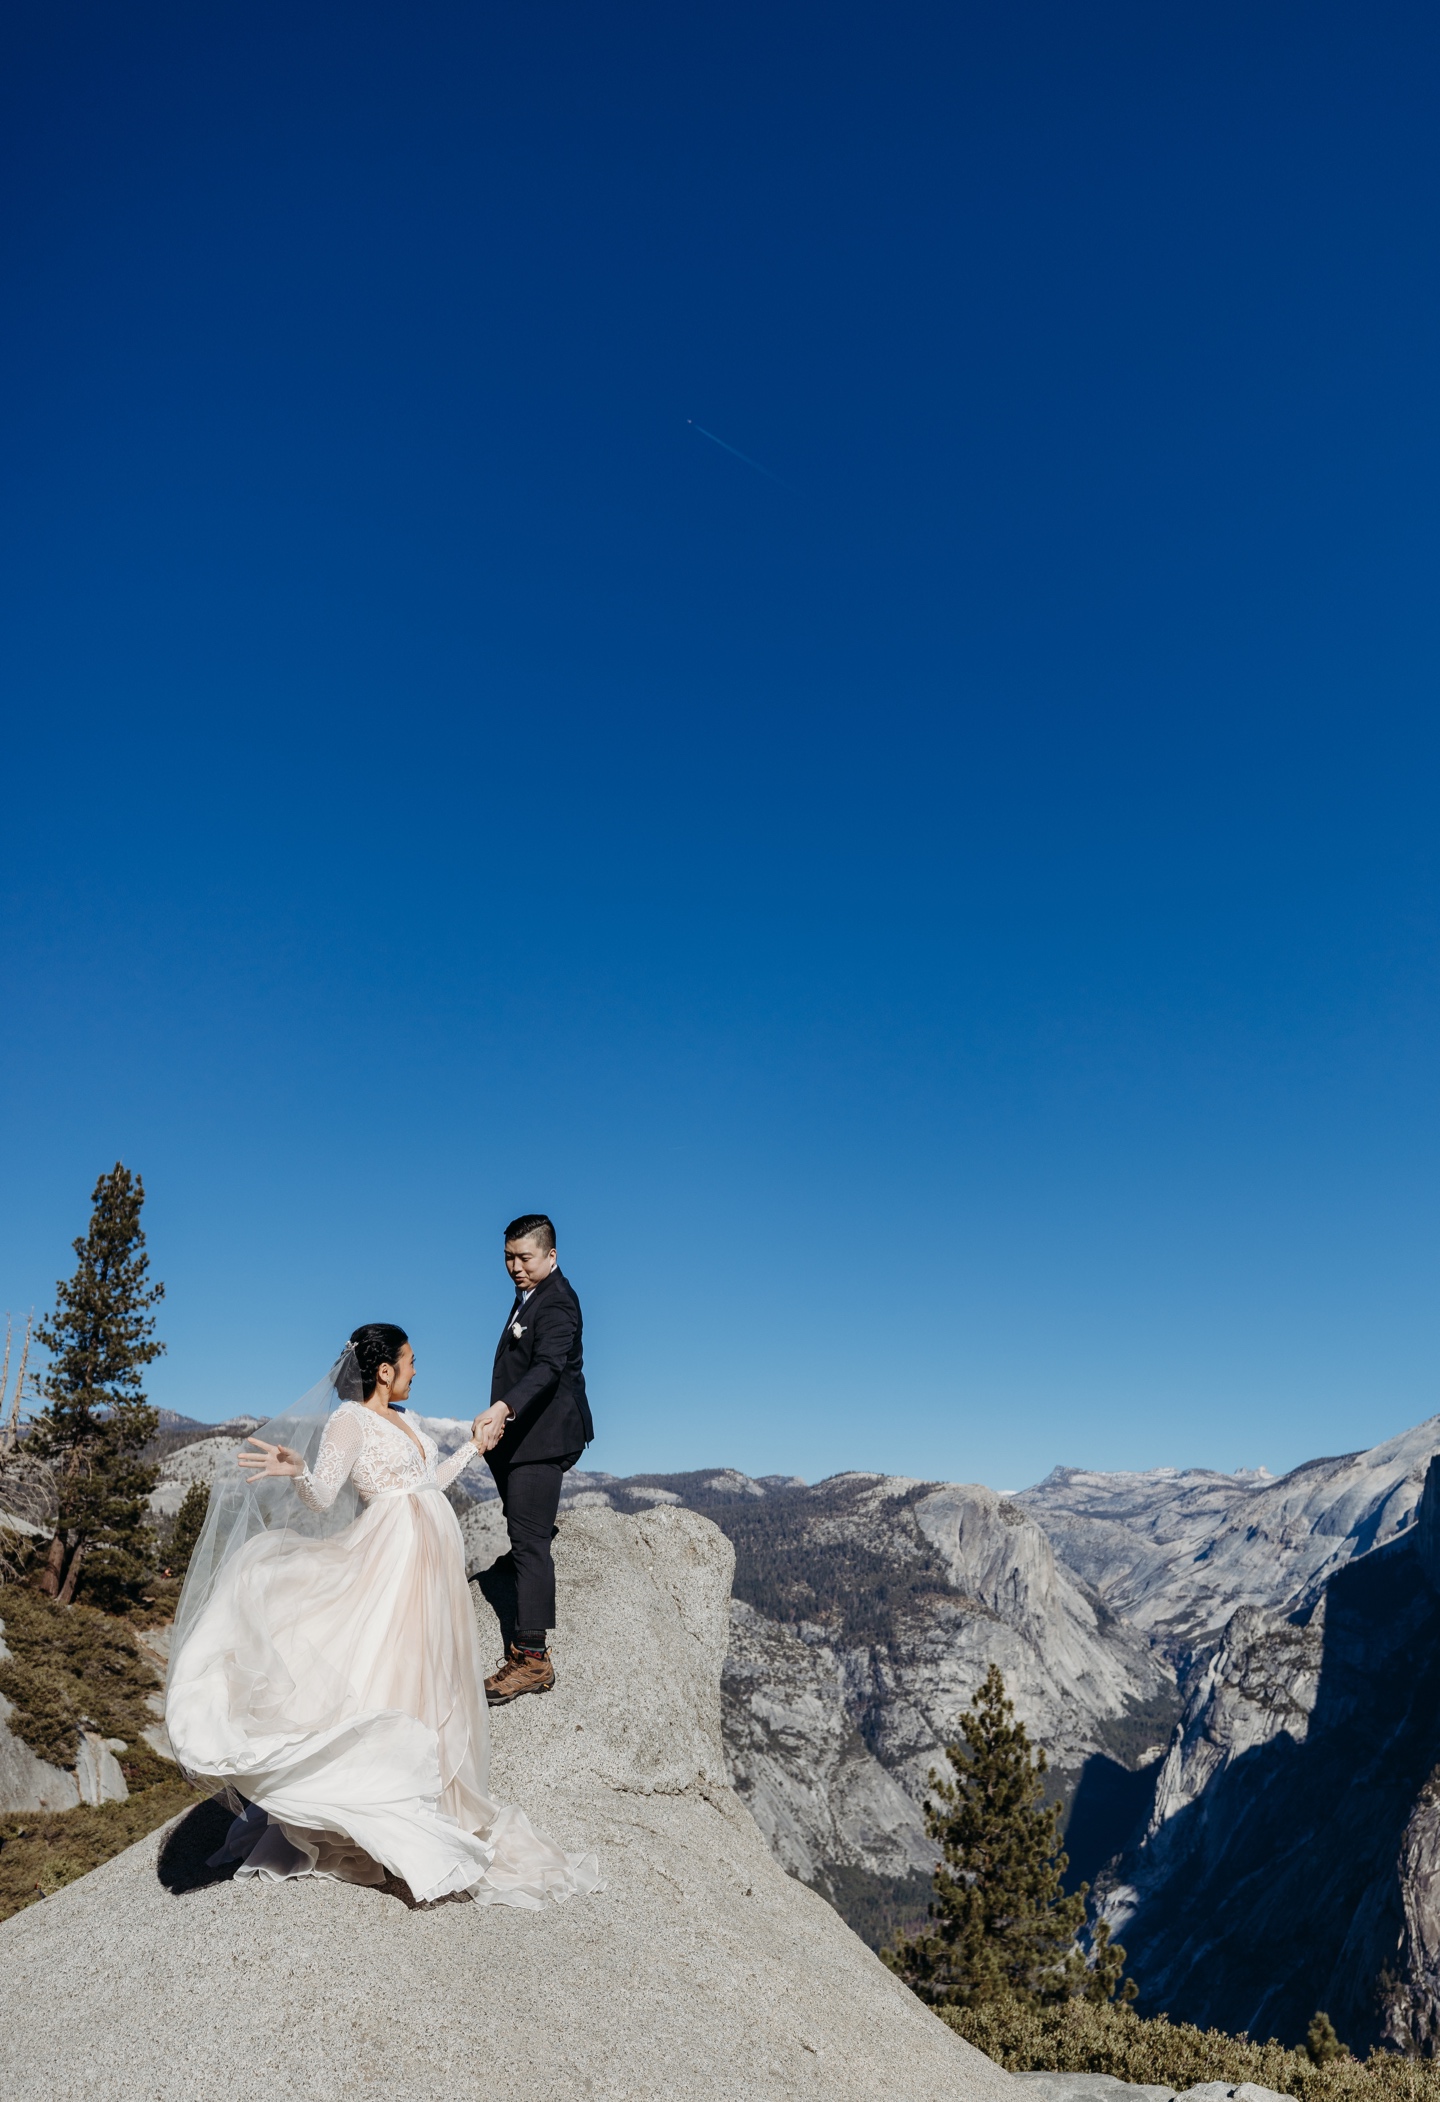 Groom helps bride climb to an overlook in Yosemite National Park.